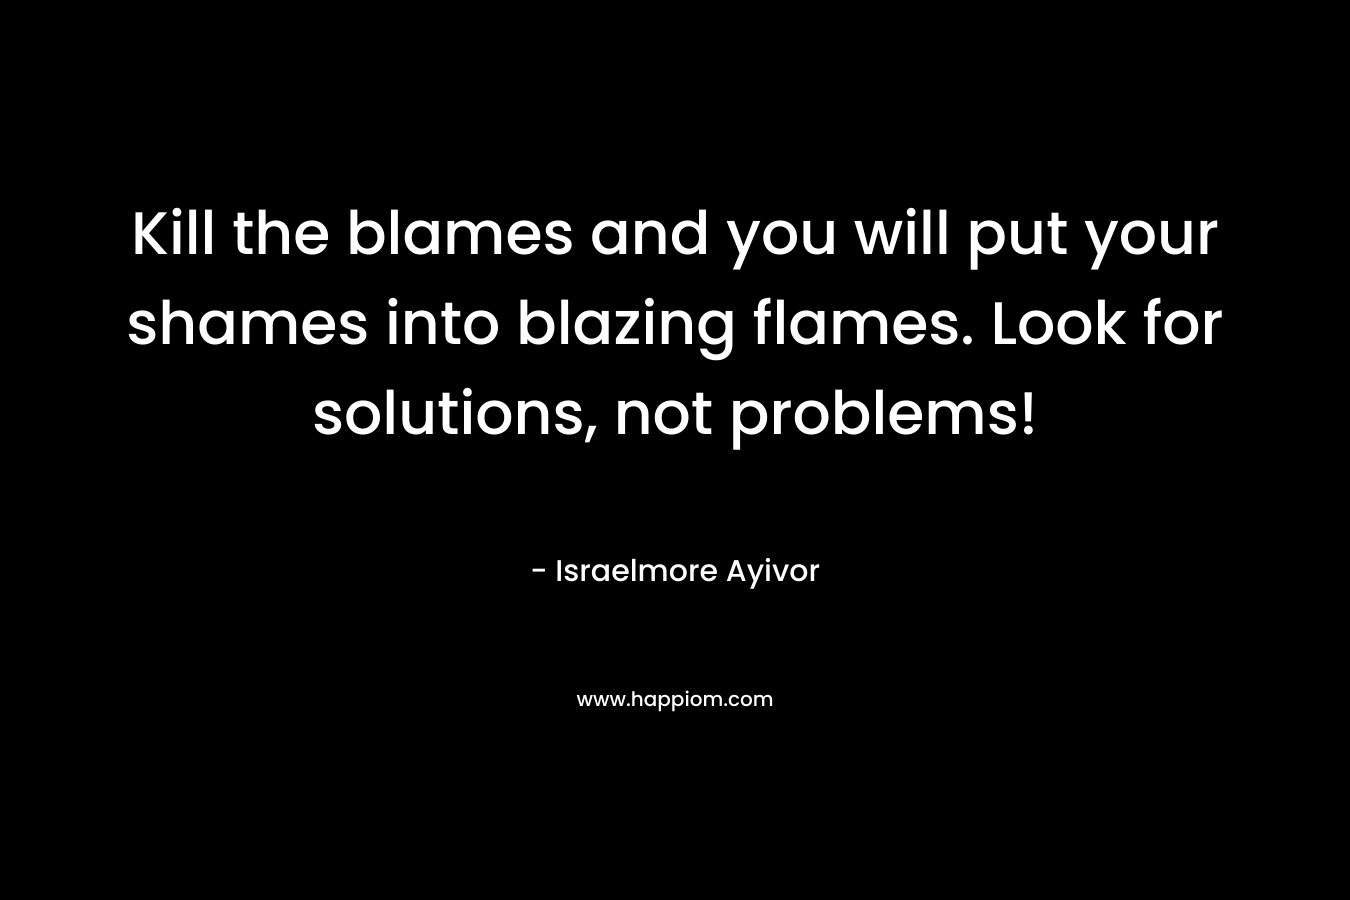 Kill the blames and you will put your shames into blazing flames. Look for solutions, not problems!